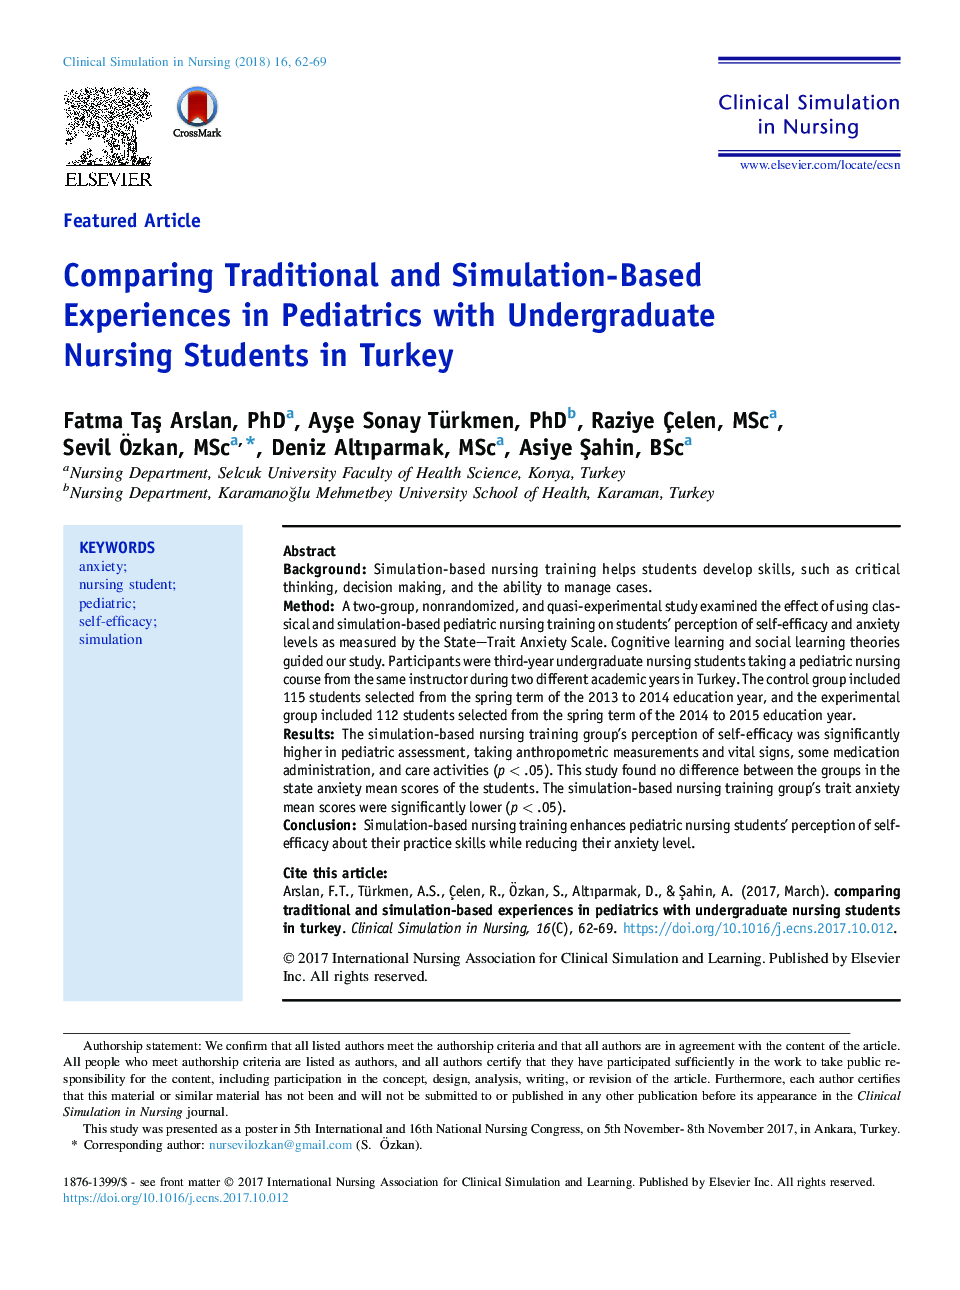 Comparing Traditional and Simulation-Based Experiences in Pediatrics with Undergraduate Nursing Students in Turkey